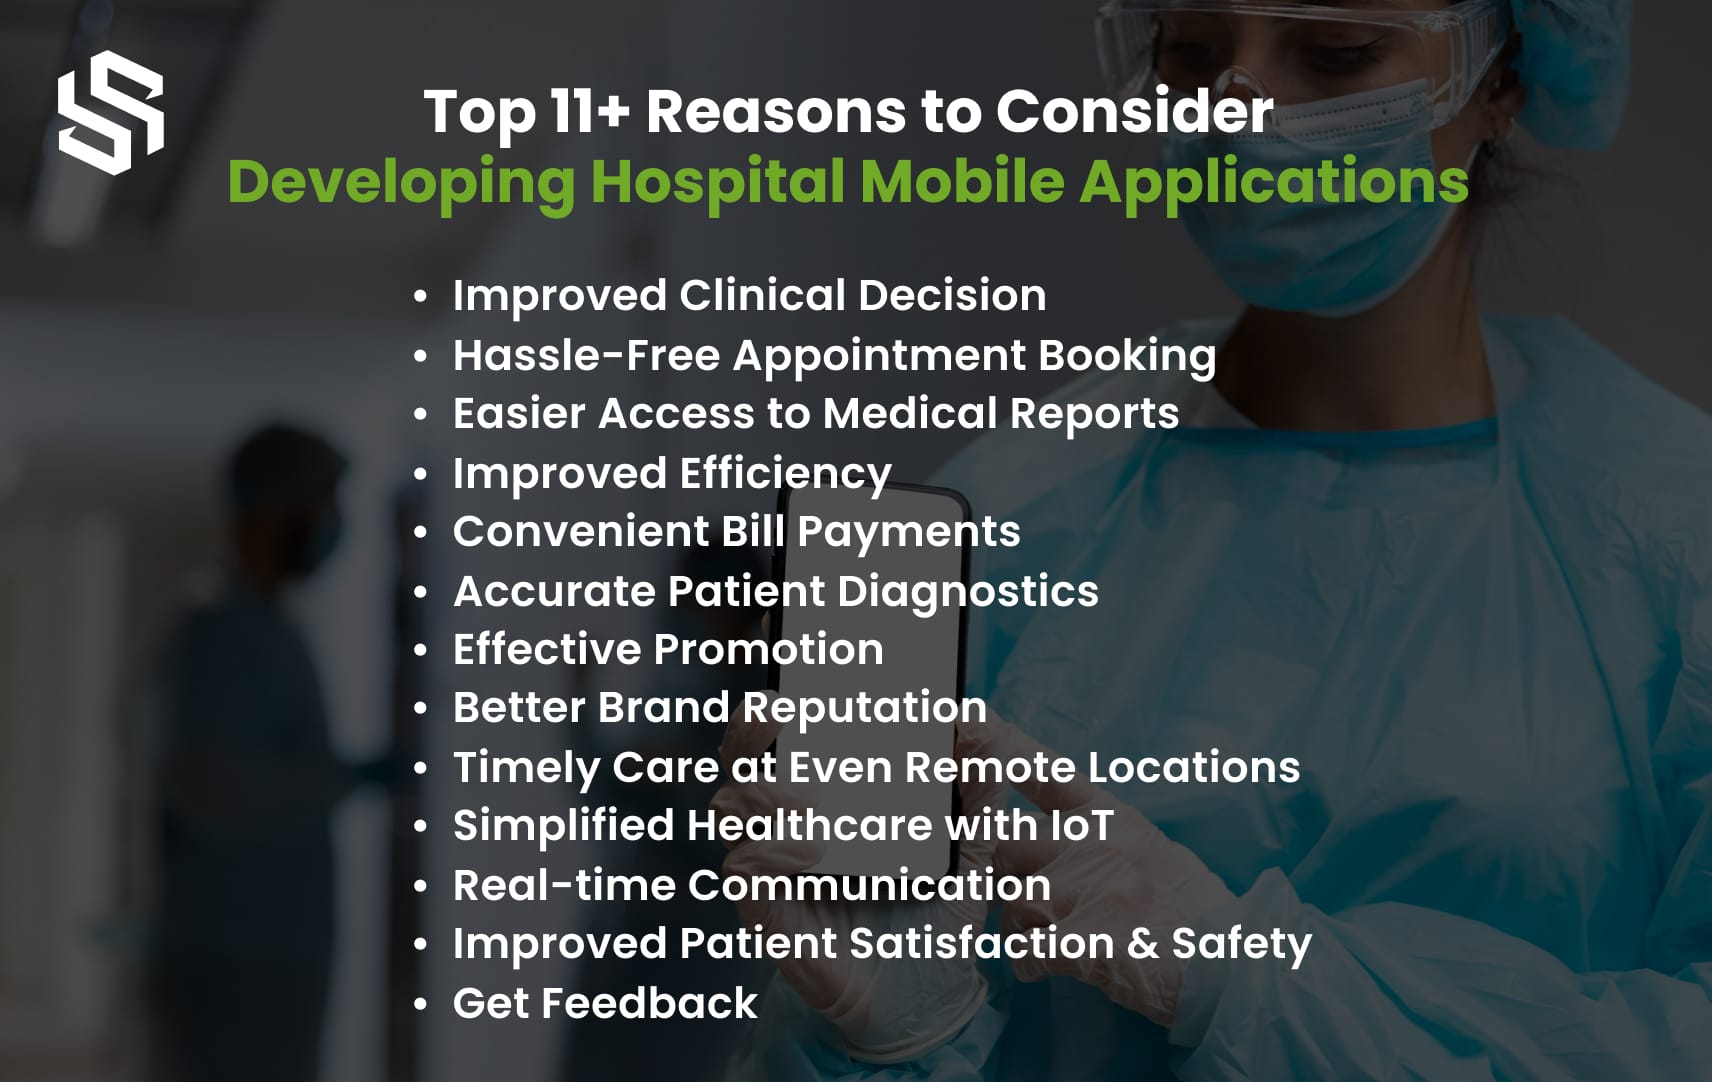 Top 11+ Reasons to Consider Developing Hospital Mobile Applications